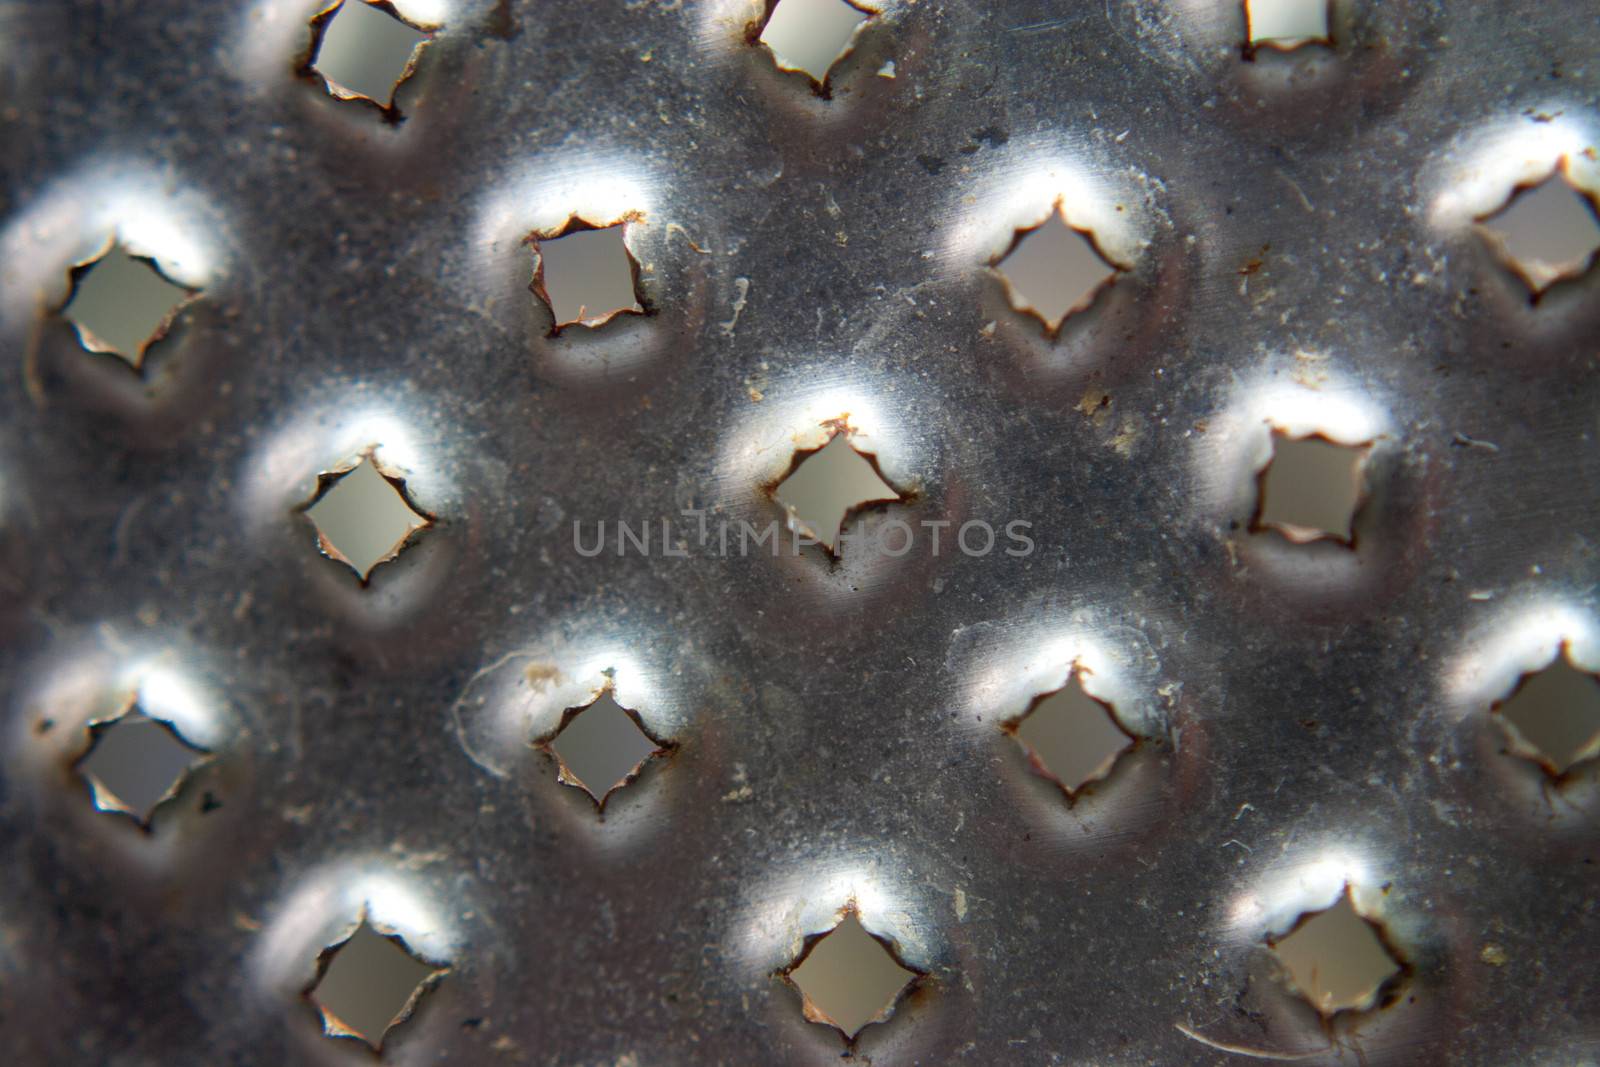 Closeup of the surface of a kitchen food grater.